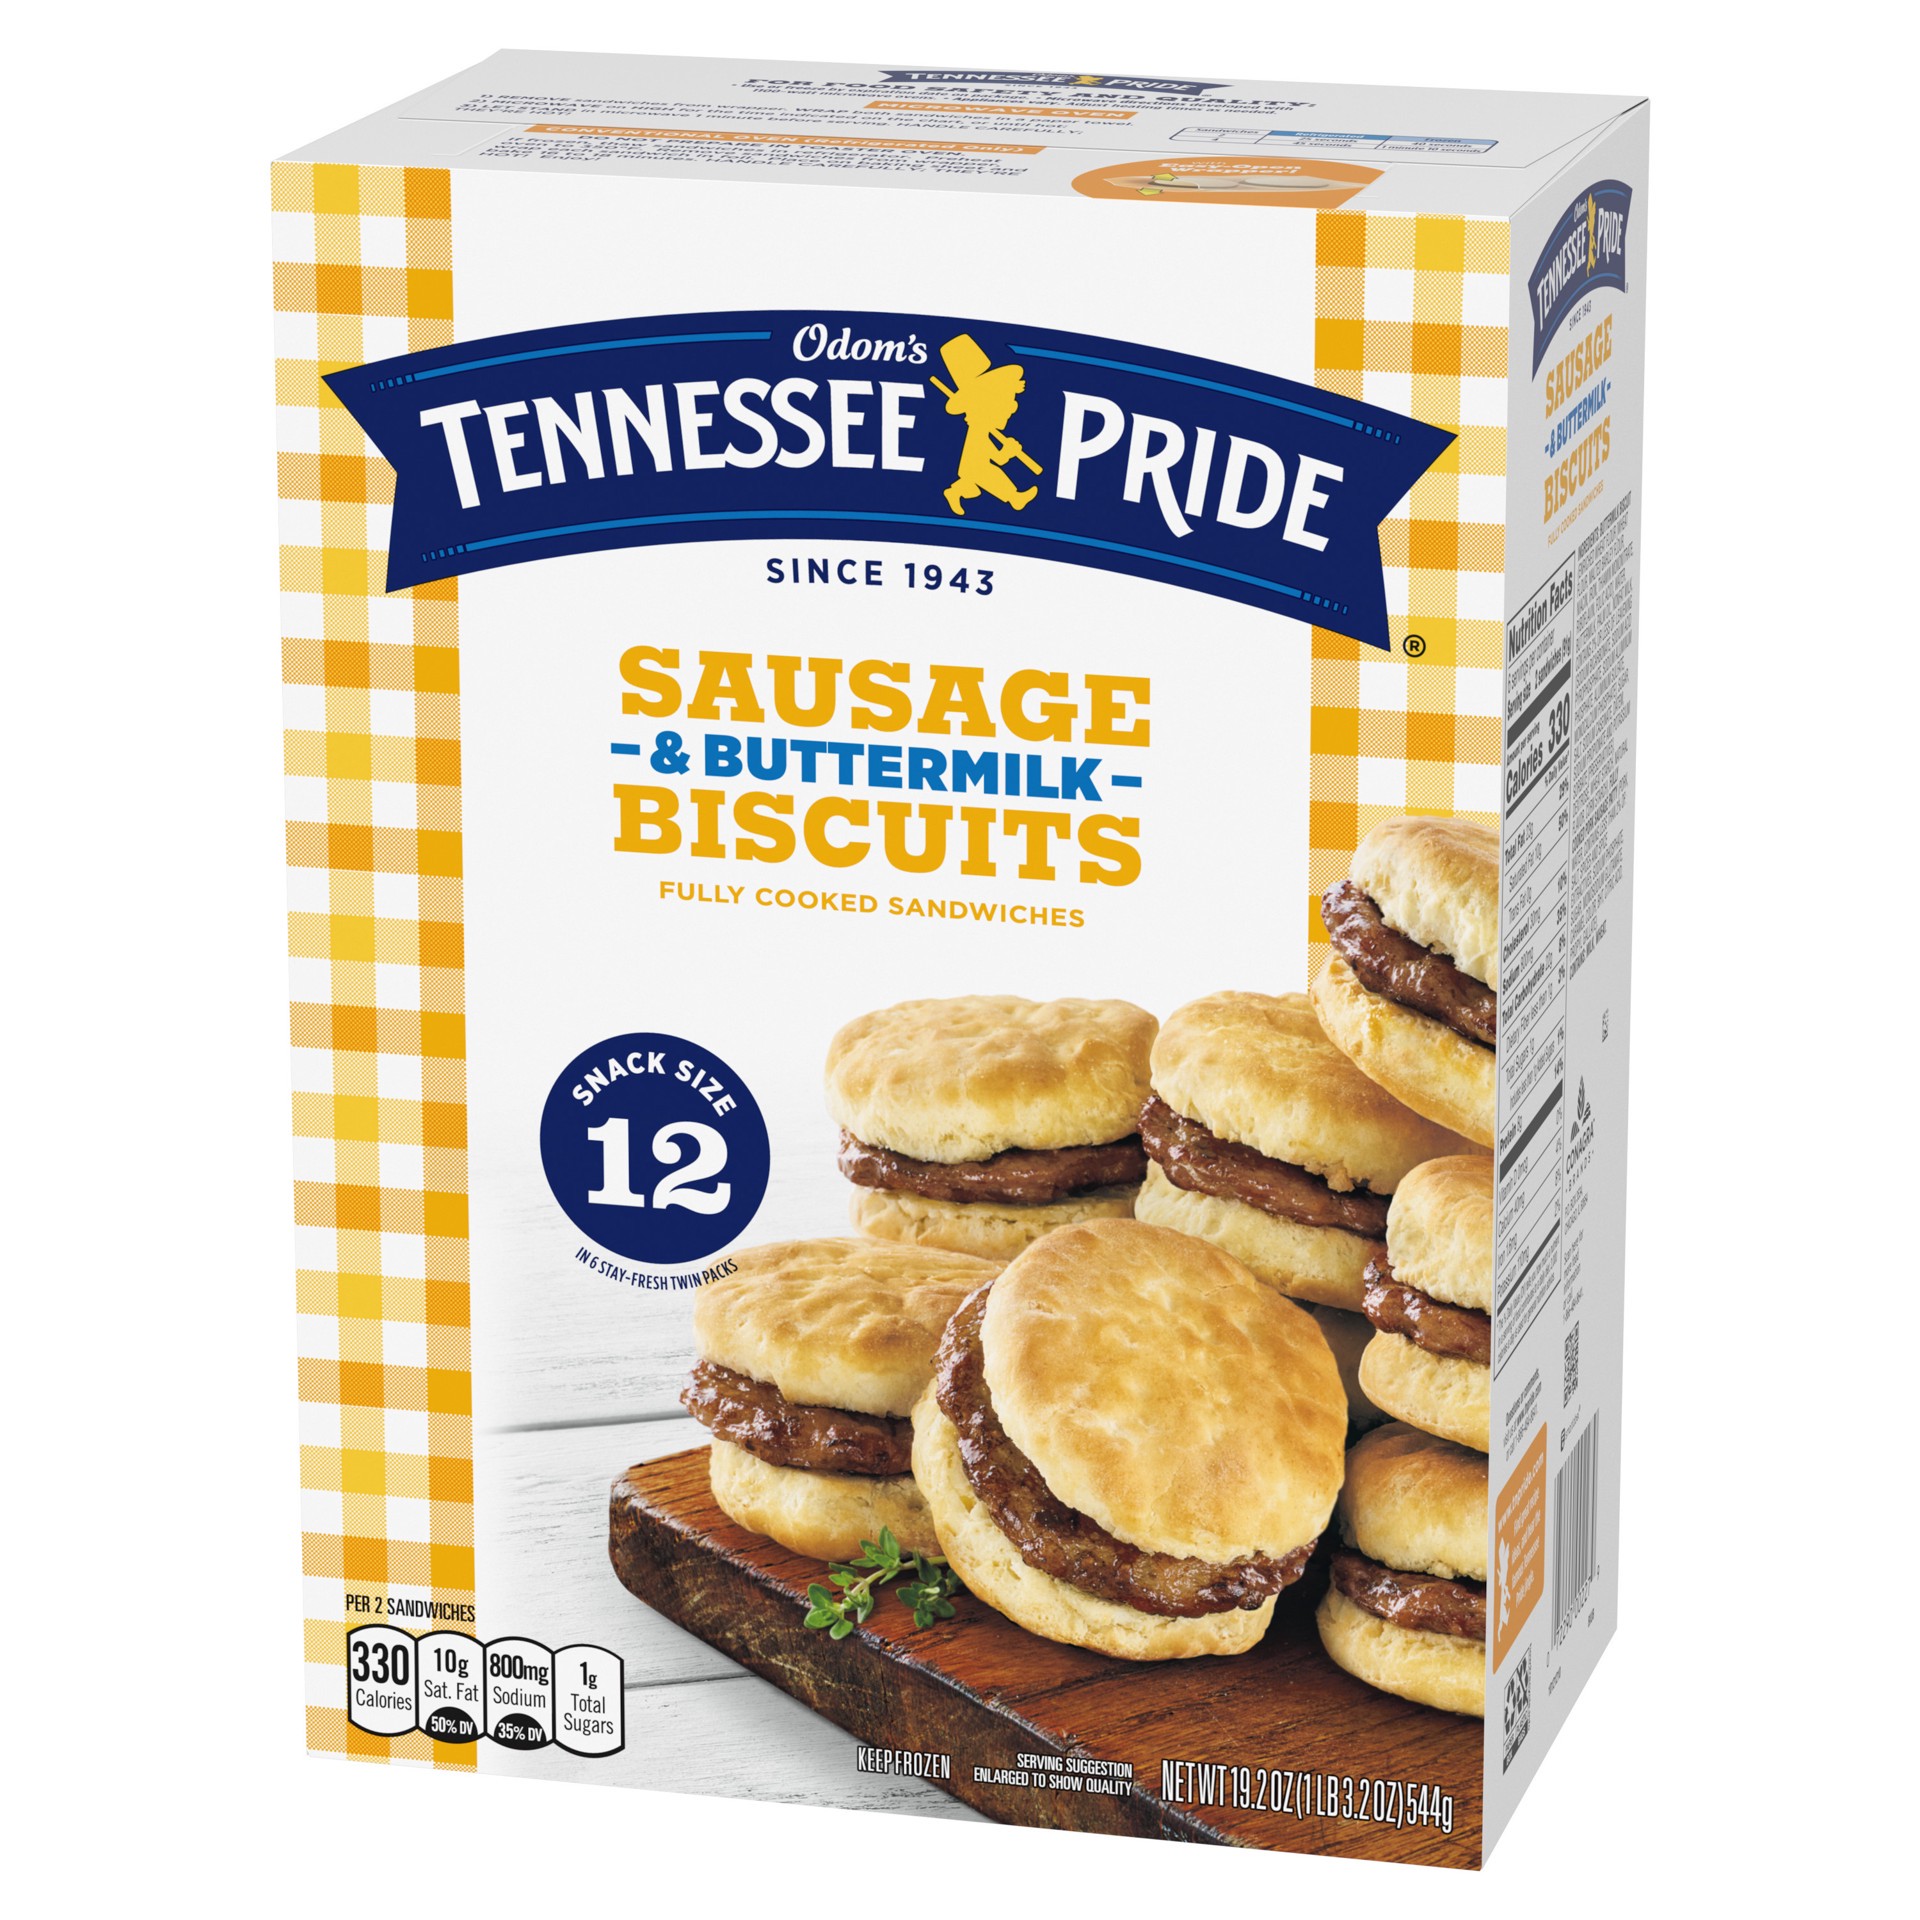 slide 3 of 5, Odom's Tennessee Pride Sausage & Buttermilk Biscuits Snack Size 12 ea, 12 ct